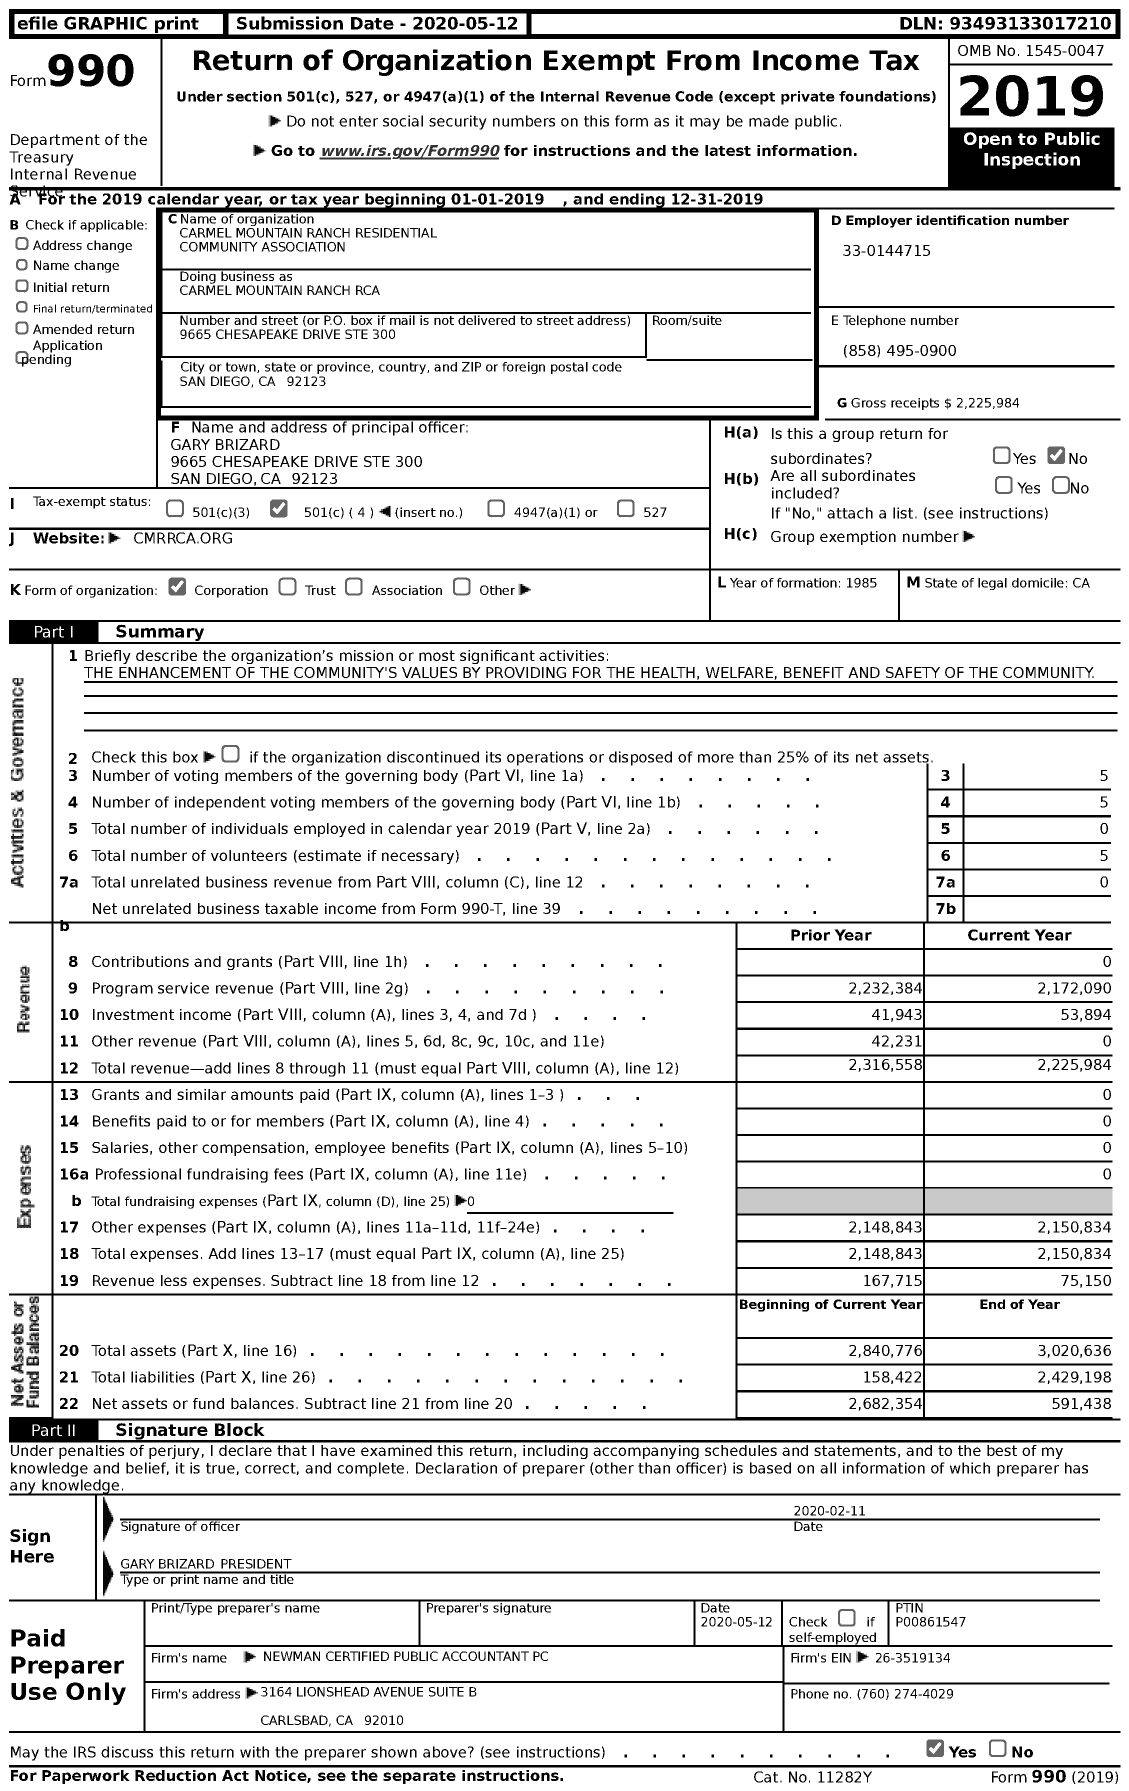 Image of first page of 2019 Form 990 for Carmel Mountain Ranch Residential Community Association